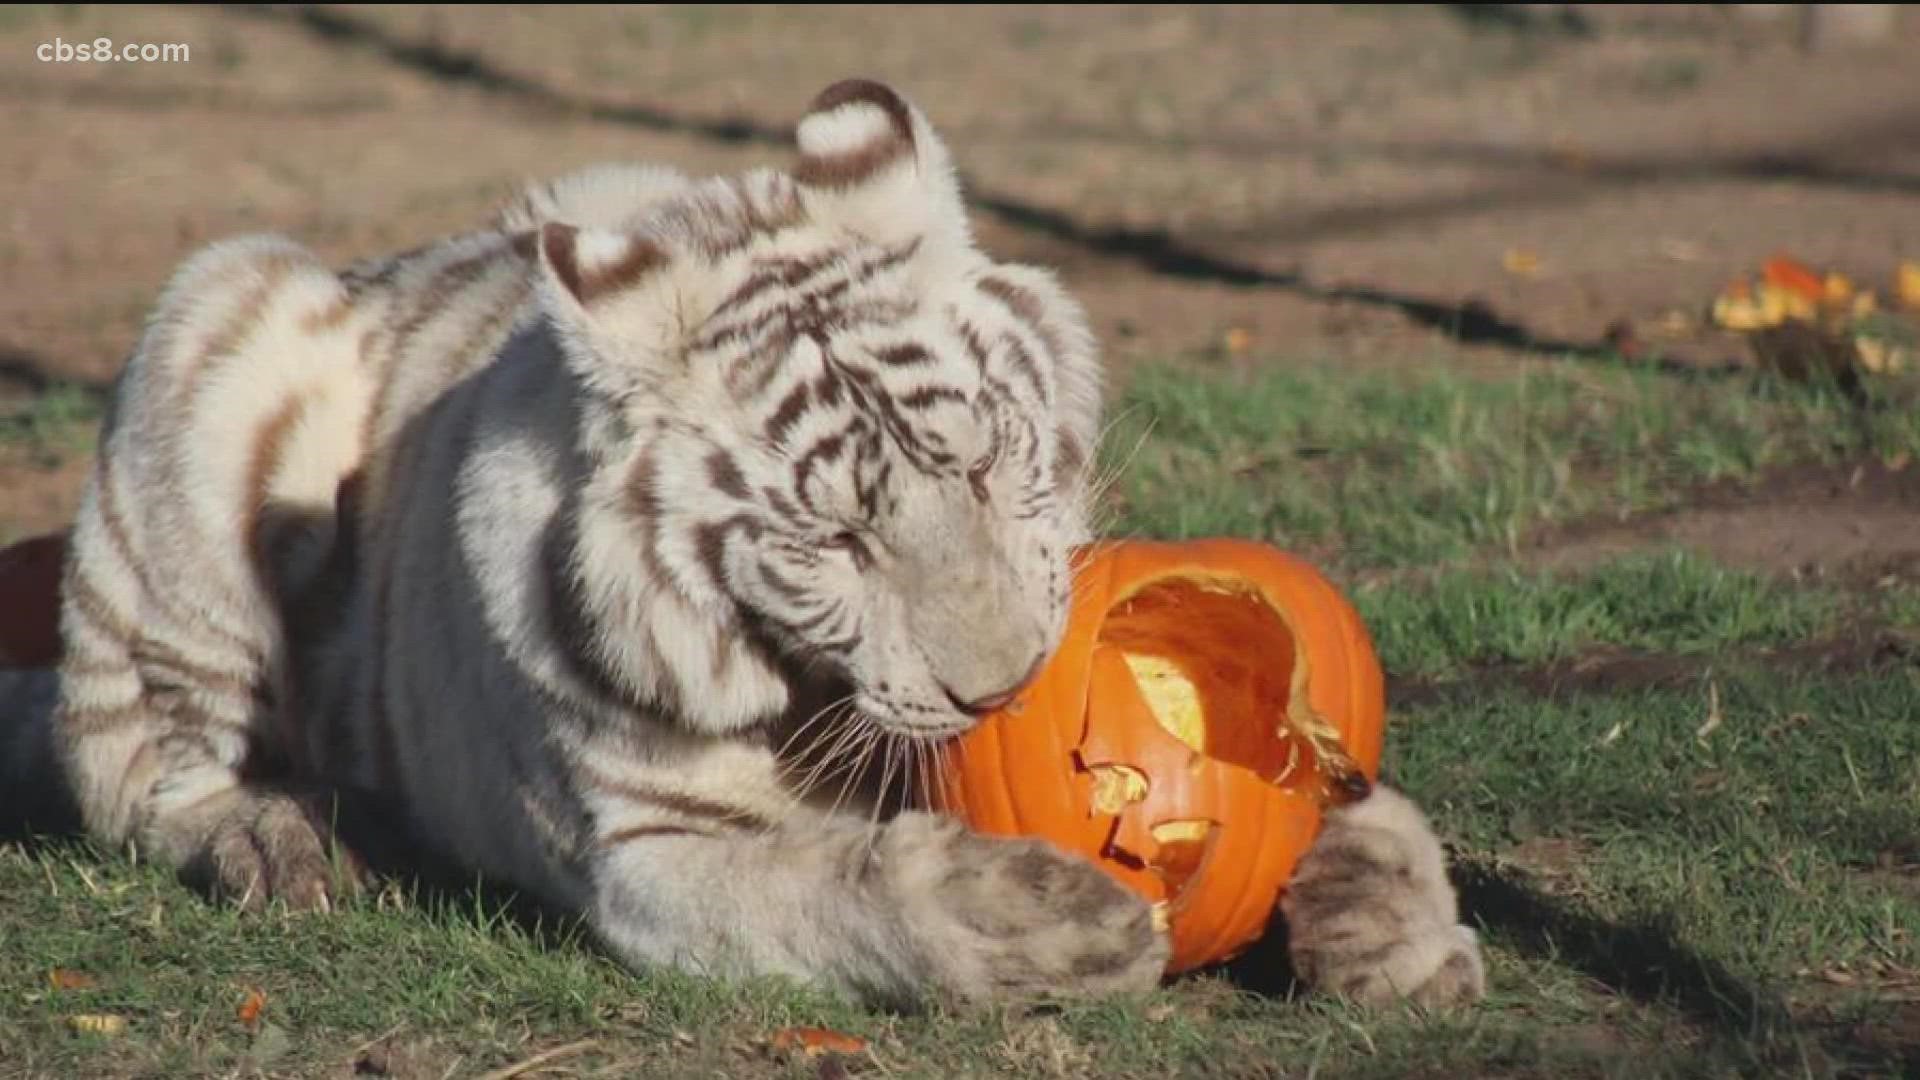 Bobbi Brink from Lions, Tigers and Bears joined Morning Extra to share info on the fun Halloween event for animal lovers.